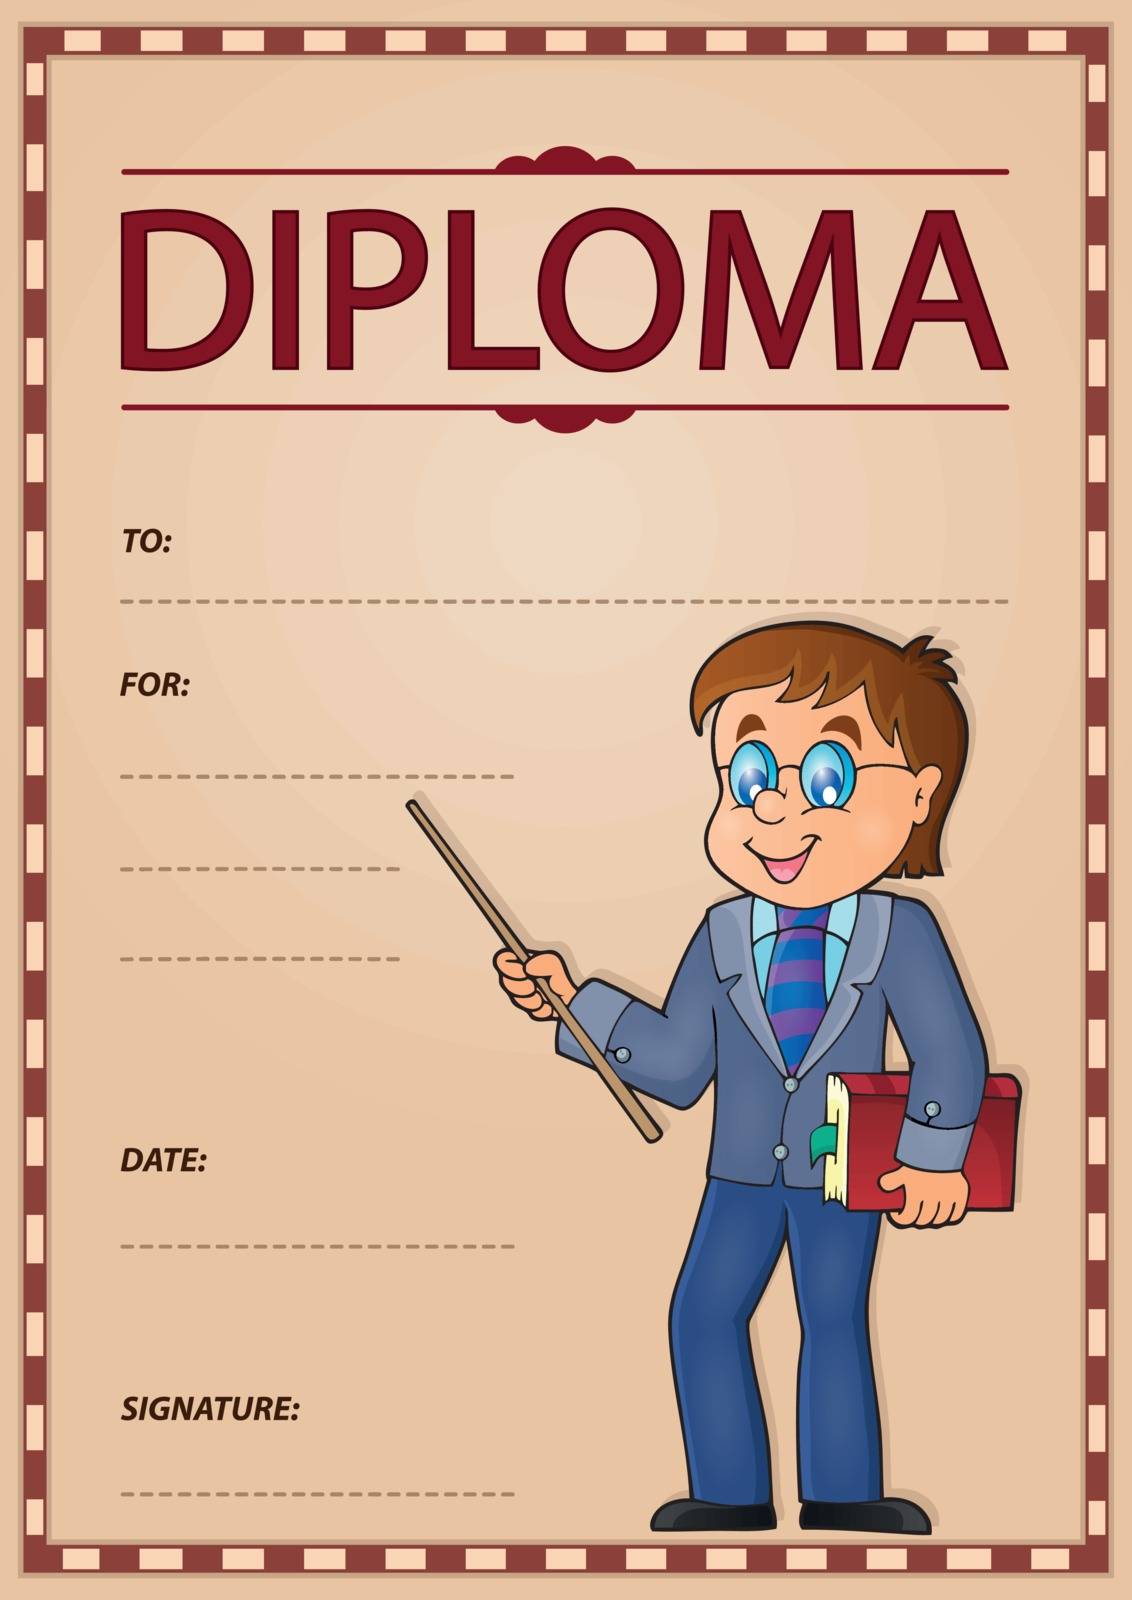 Diploma subject image 6 by clairev